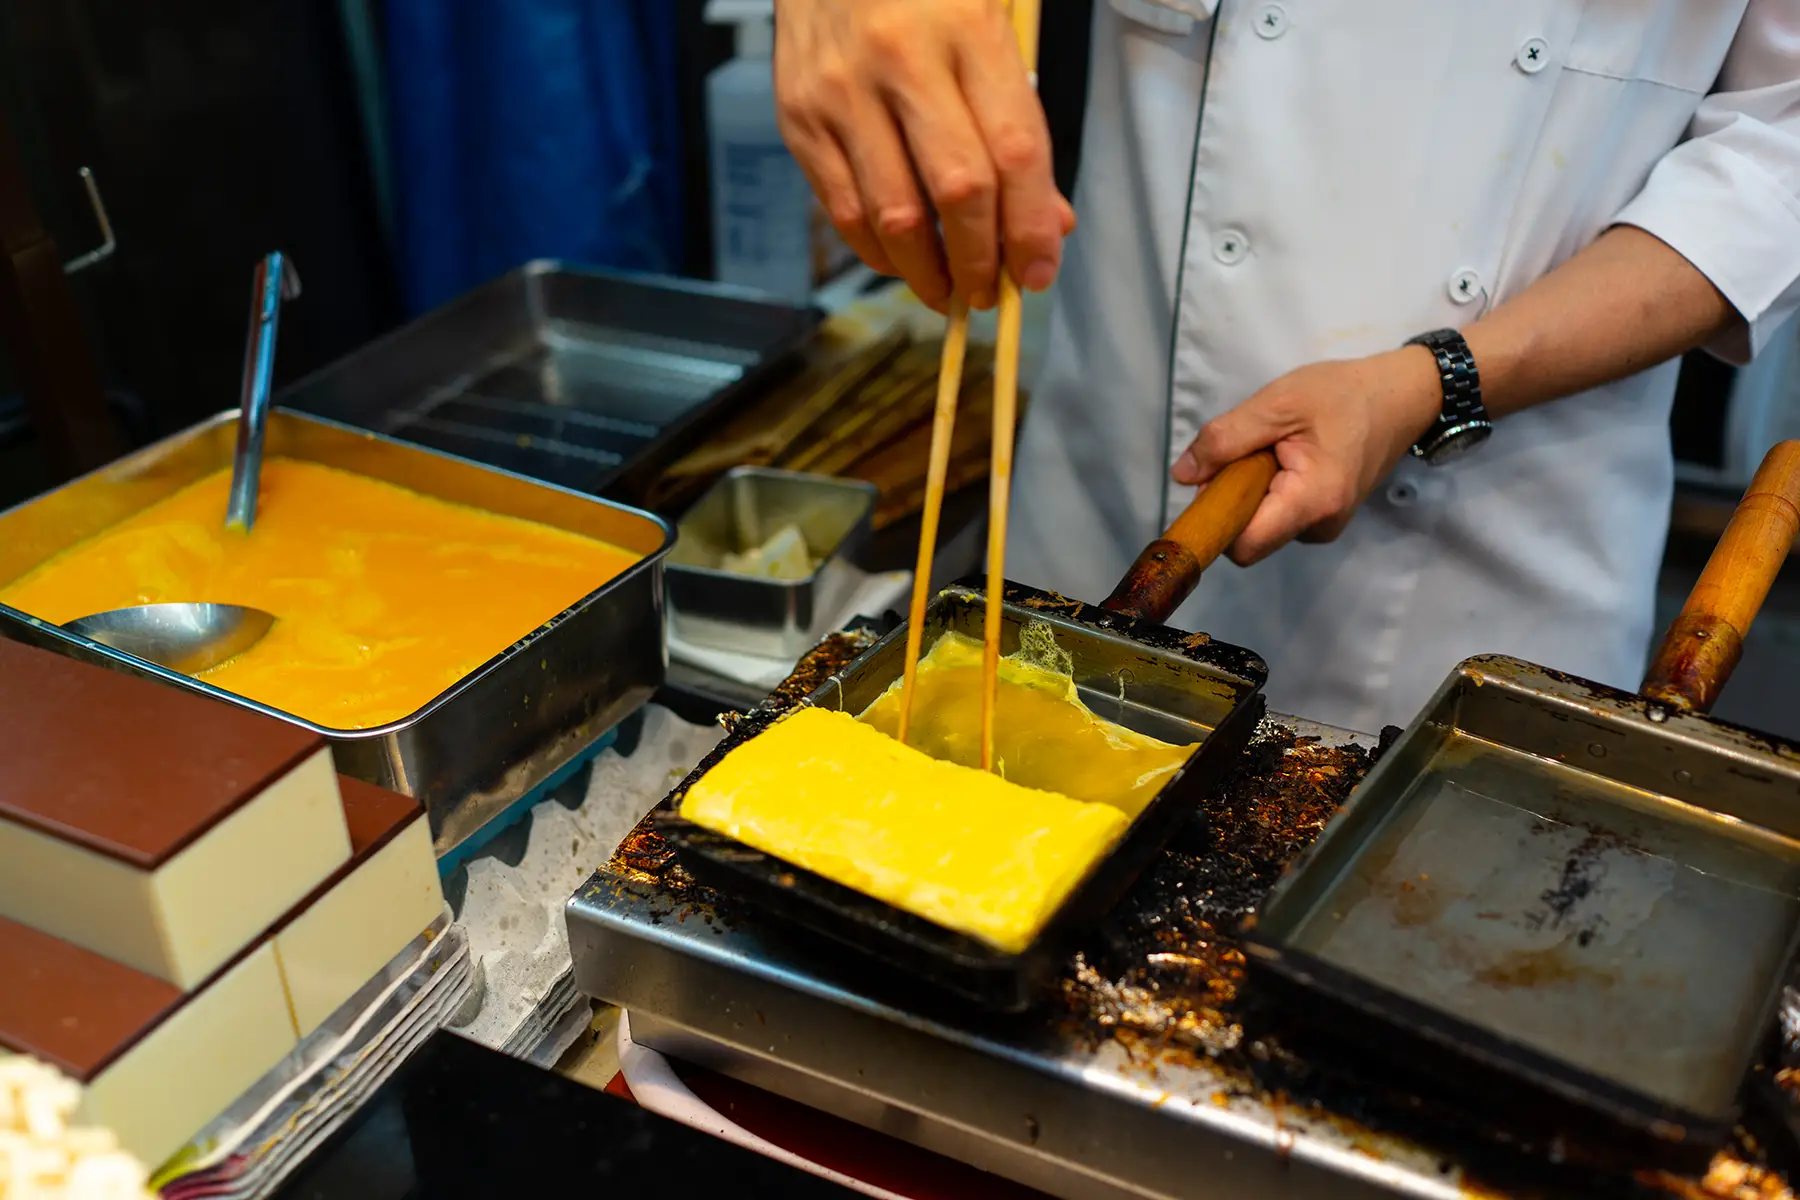 A chef cooking tamagoyaki, an egg dish which they are making in a square pan